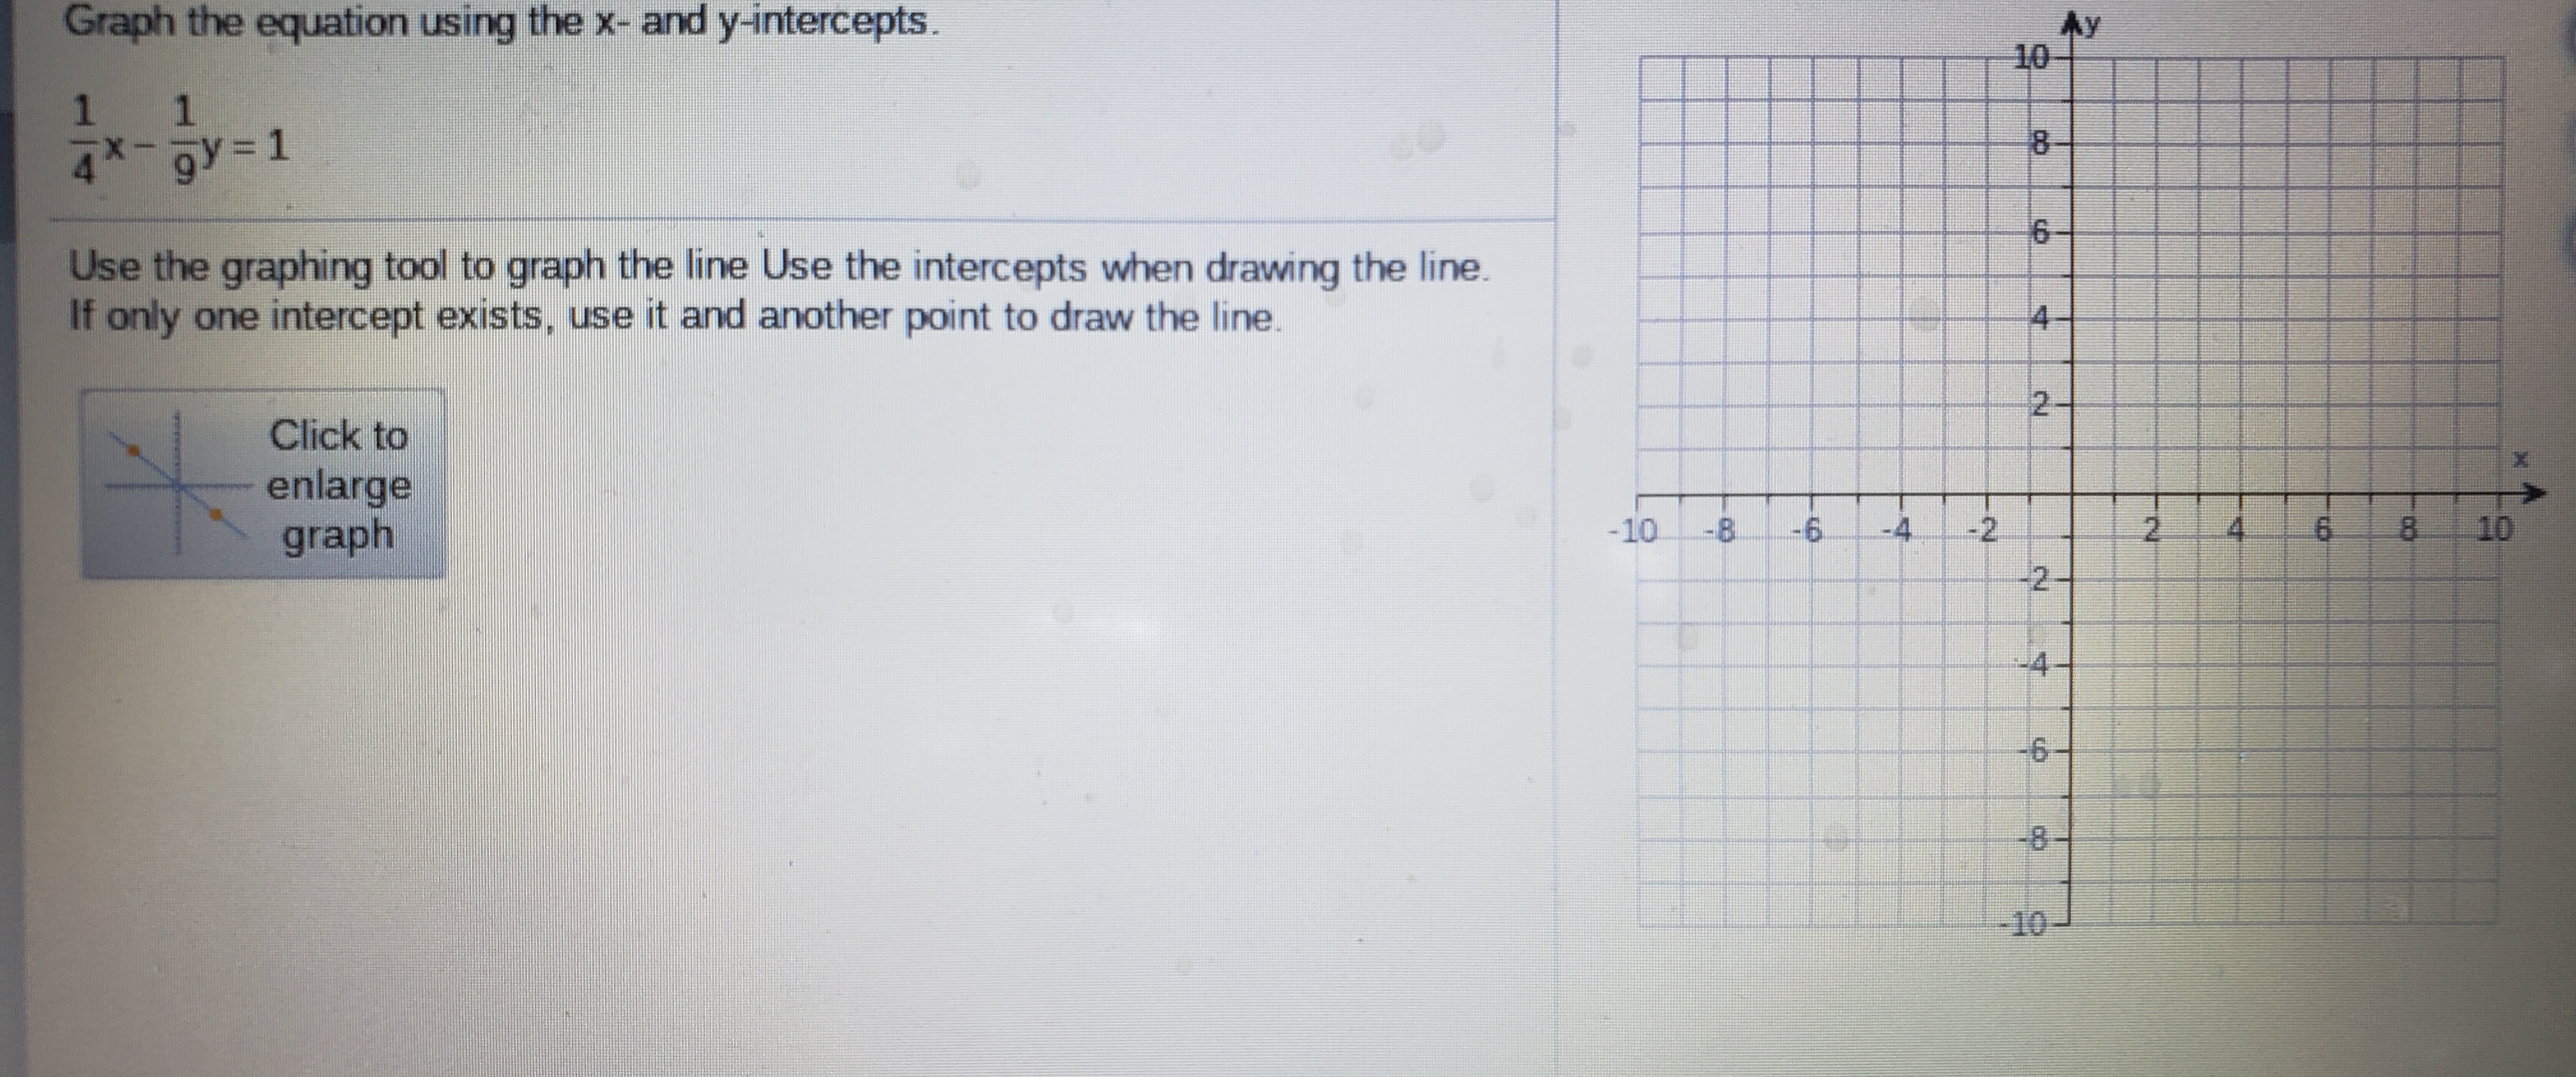 Graph the equation using the x- and y-intercepts.
Ay
10
1.
4*-9Y3D1
Use the graphing tool to graph the line Use the intercepts when drawing the line.
If only one intercept exists, use it and another point to draw the line.
2-
Click to
enlarge
graph
-10
-8
-6
-4
2.
4.
8.
10
-4
-8-
-10
B.
8.
4.
2.
2.
